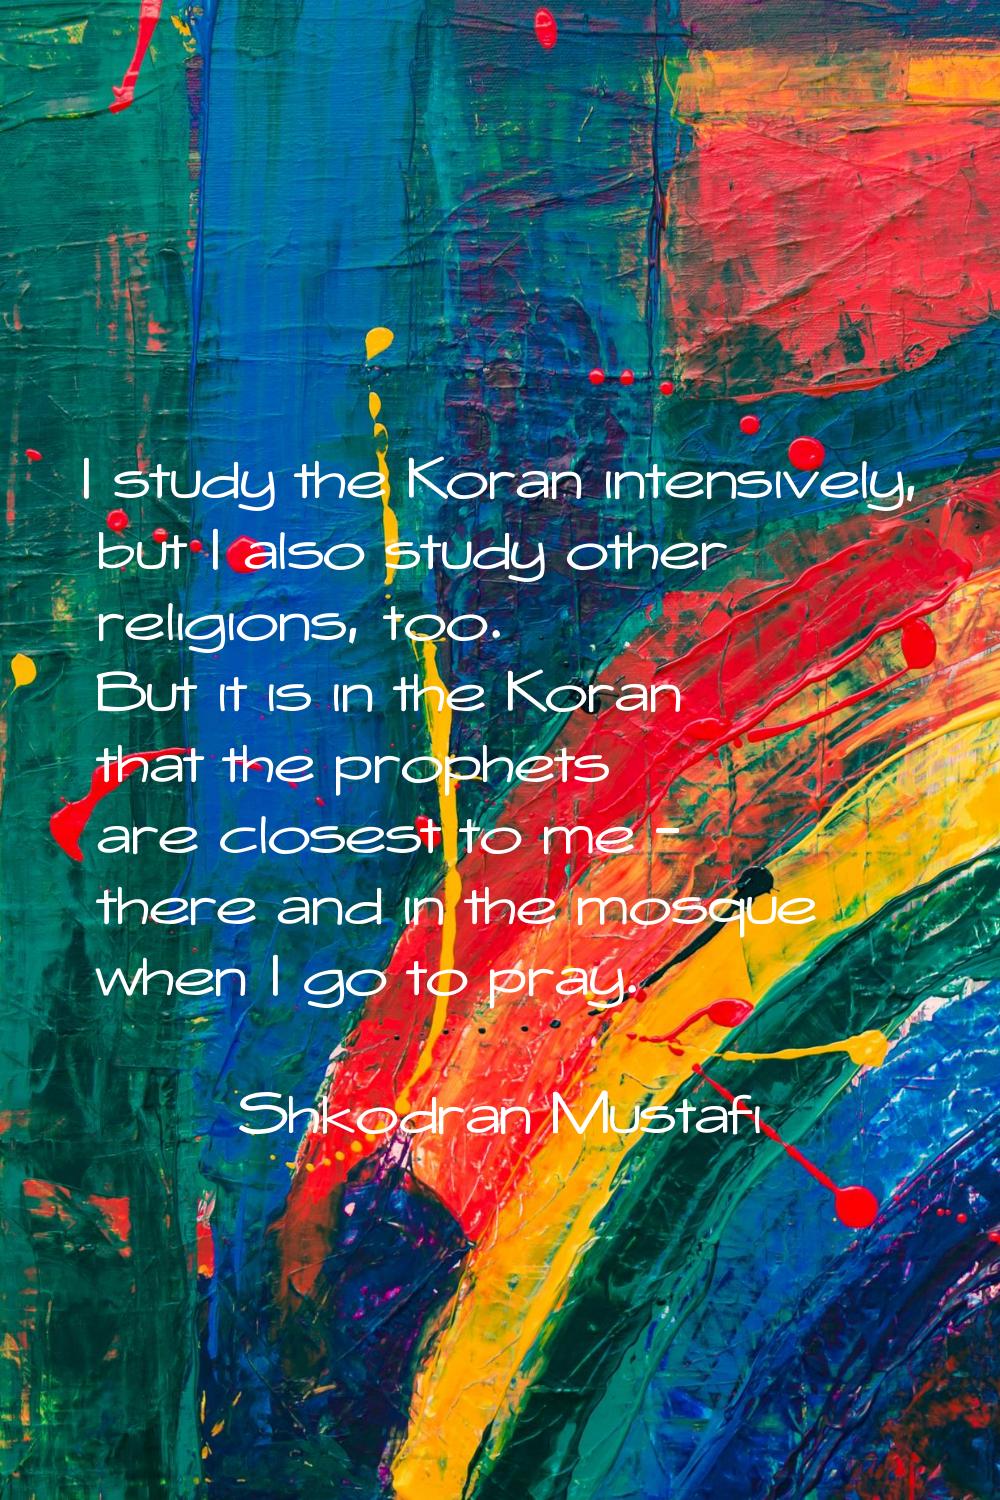 I study the Koran intensively, but I also study other religions, too. But it is in the Koran that t